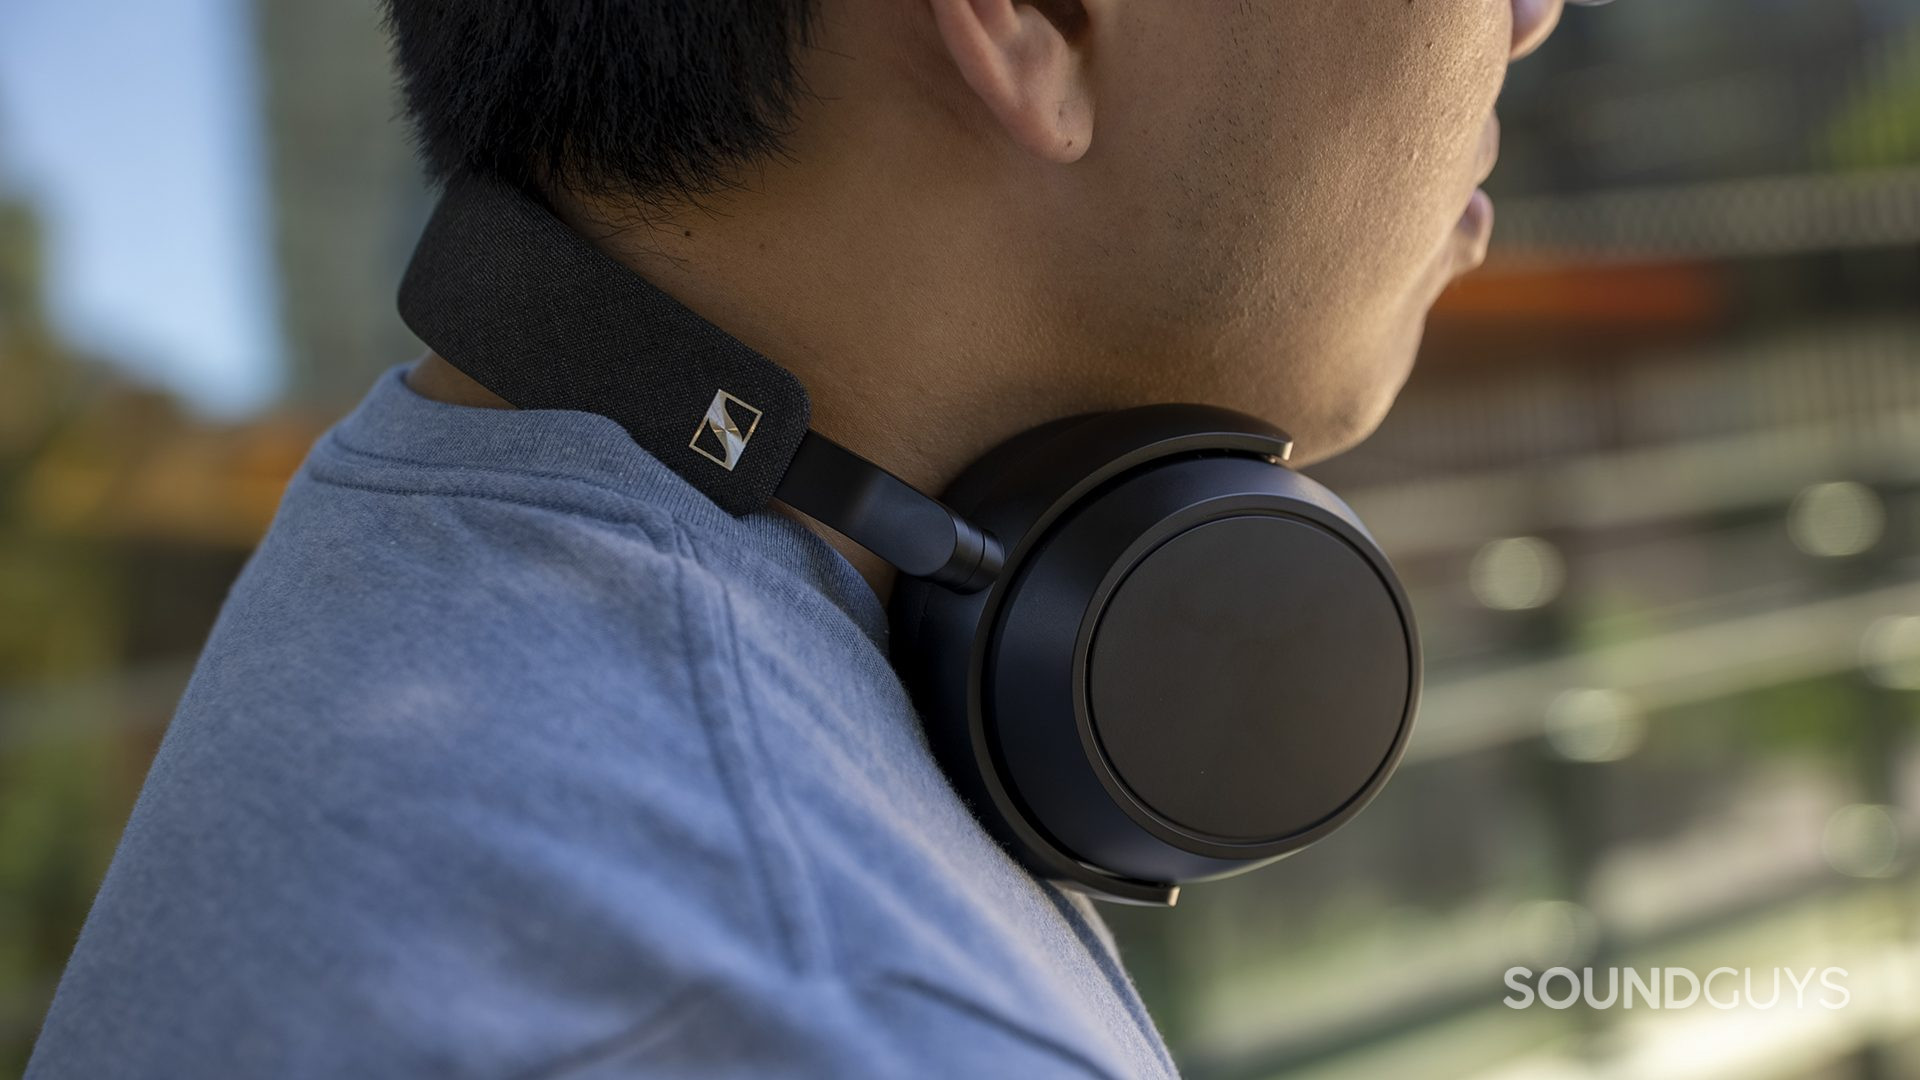 A man wears the Sennheiser MOMENTUM 4 Wireless around his neck while outside.